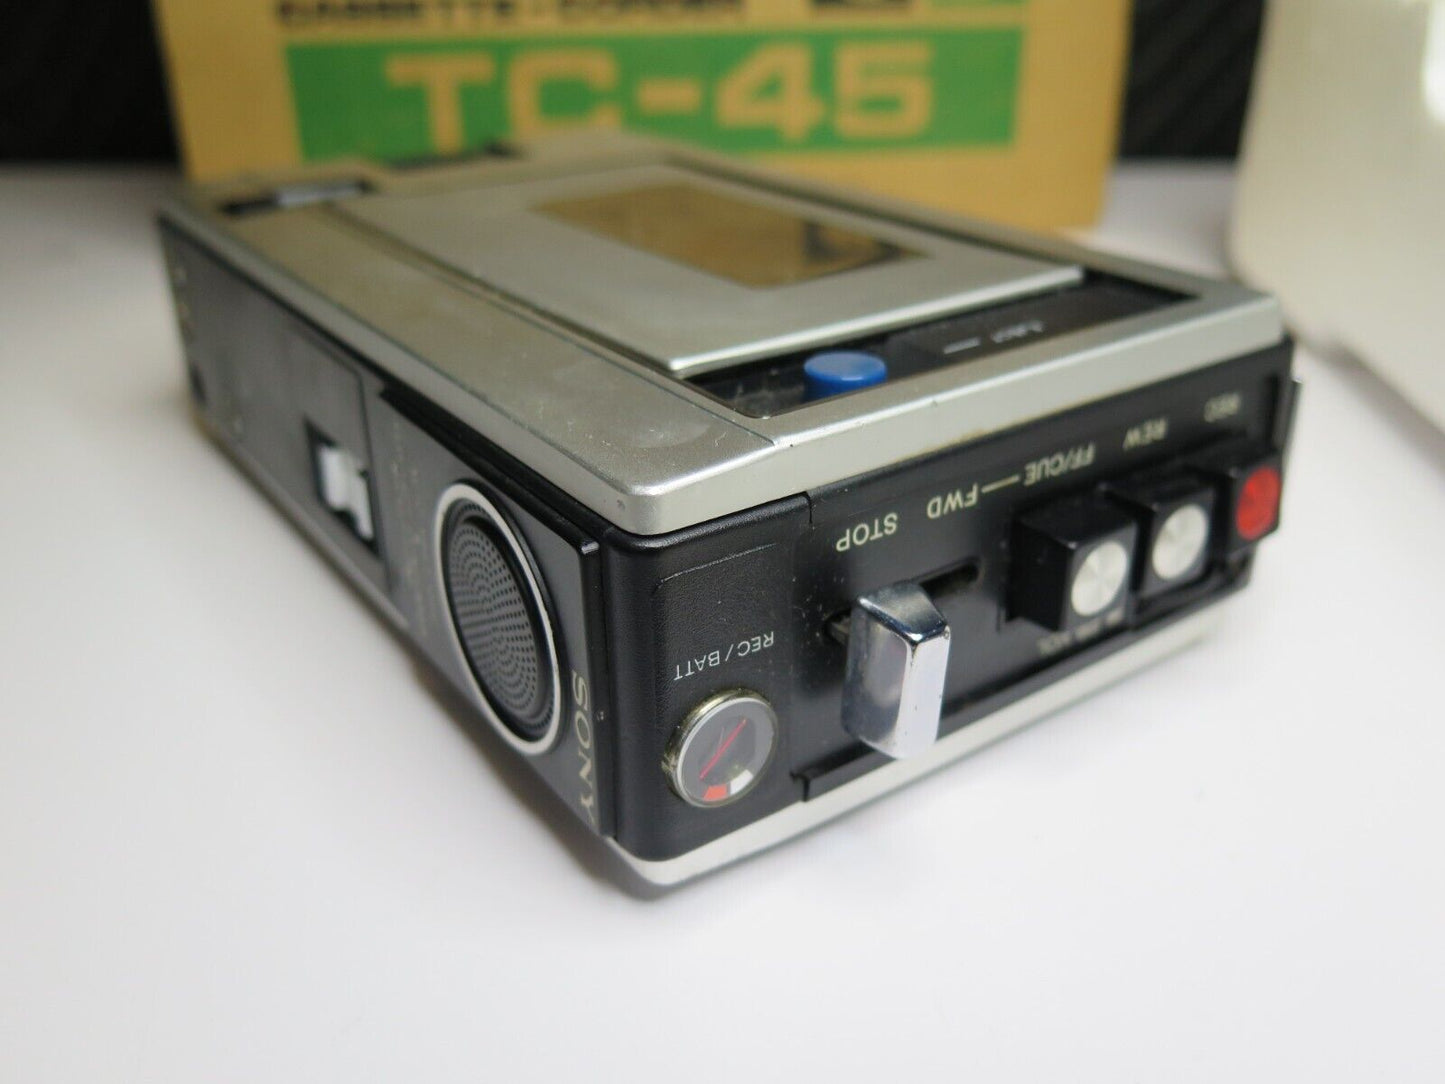 SONY TC-45 TAPE RECORDER CASSETTE PLAYER VINTAGE in Original Box w/ Manual